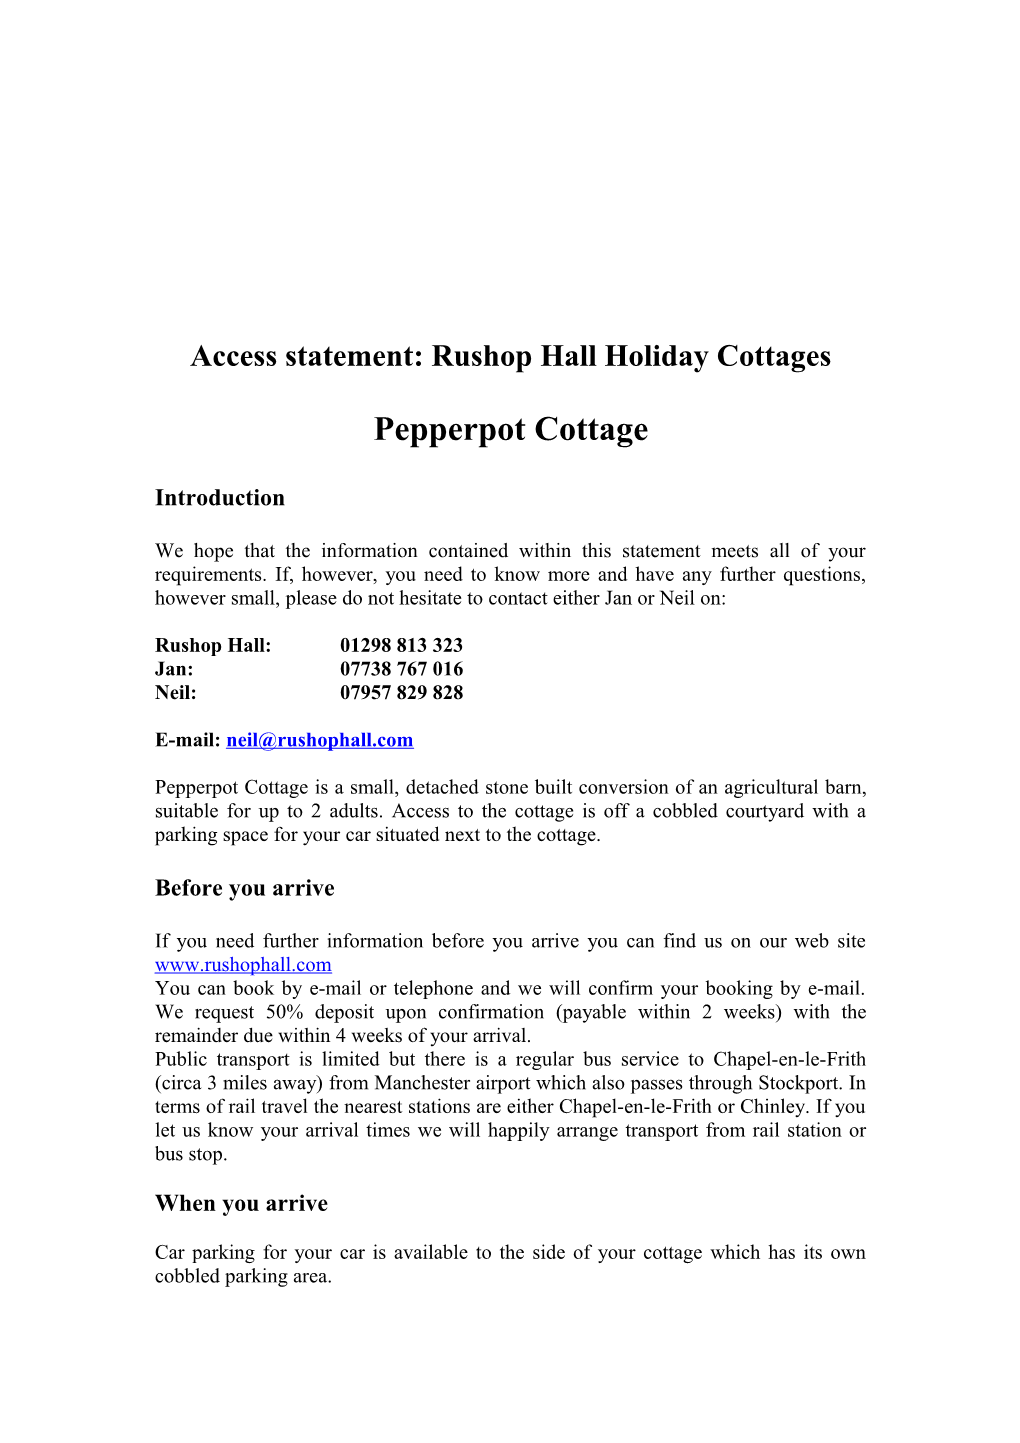 Access Statement: Rushop Hall Holiday Cottages